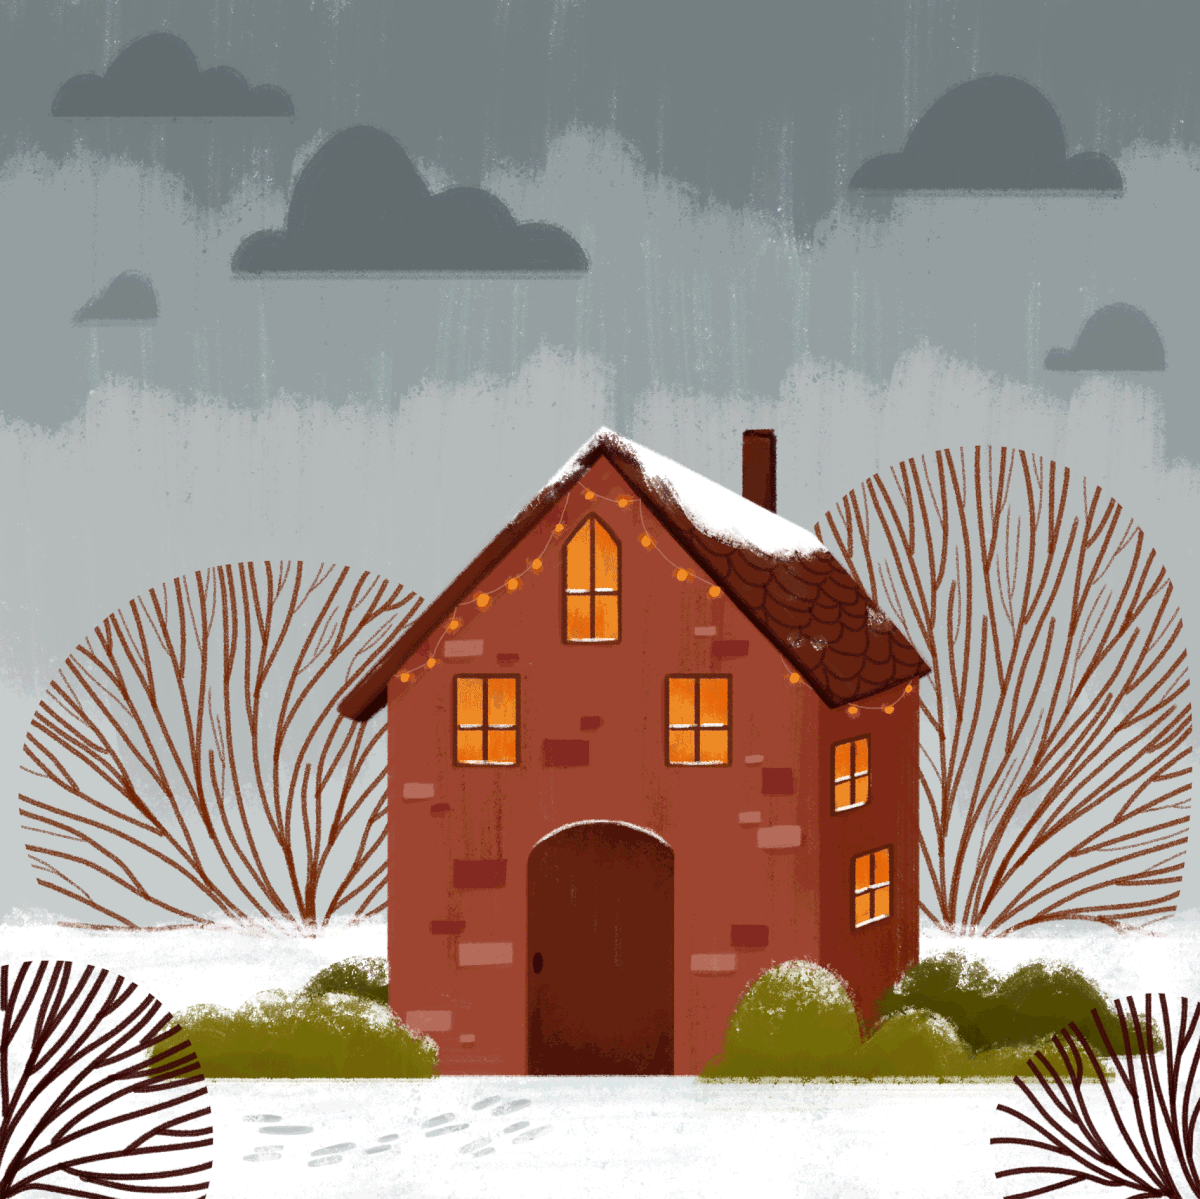 Home (illustrated Gifs) on Behance